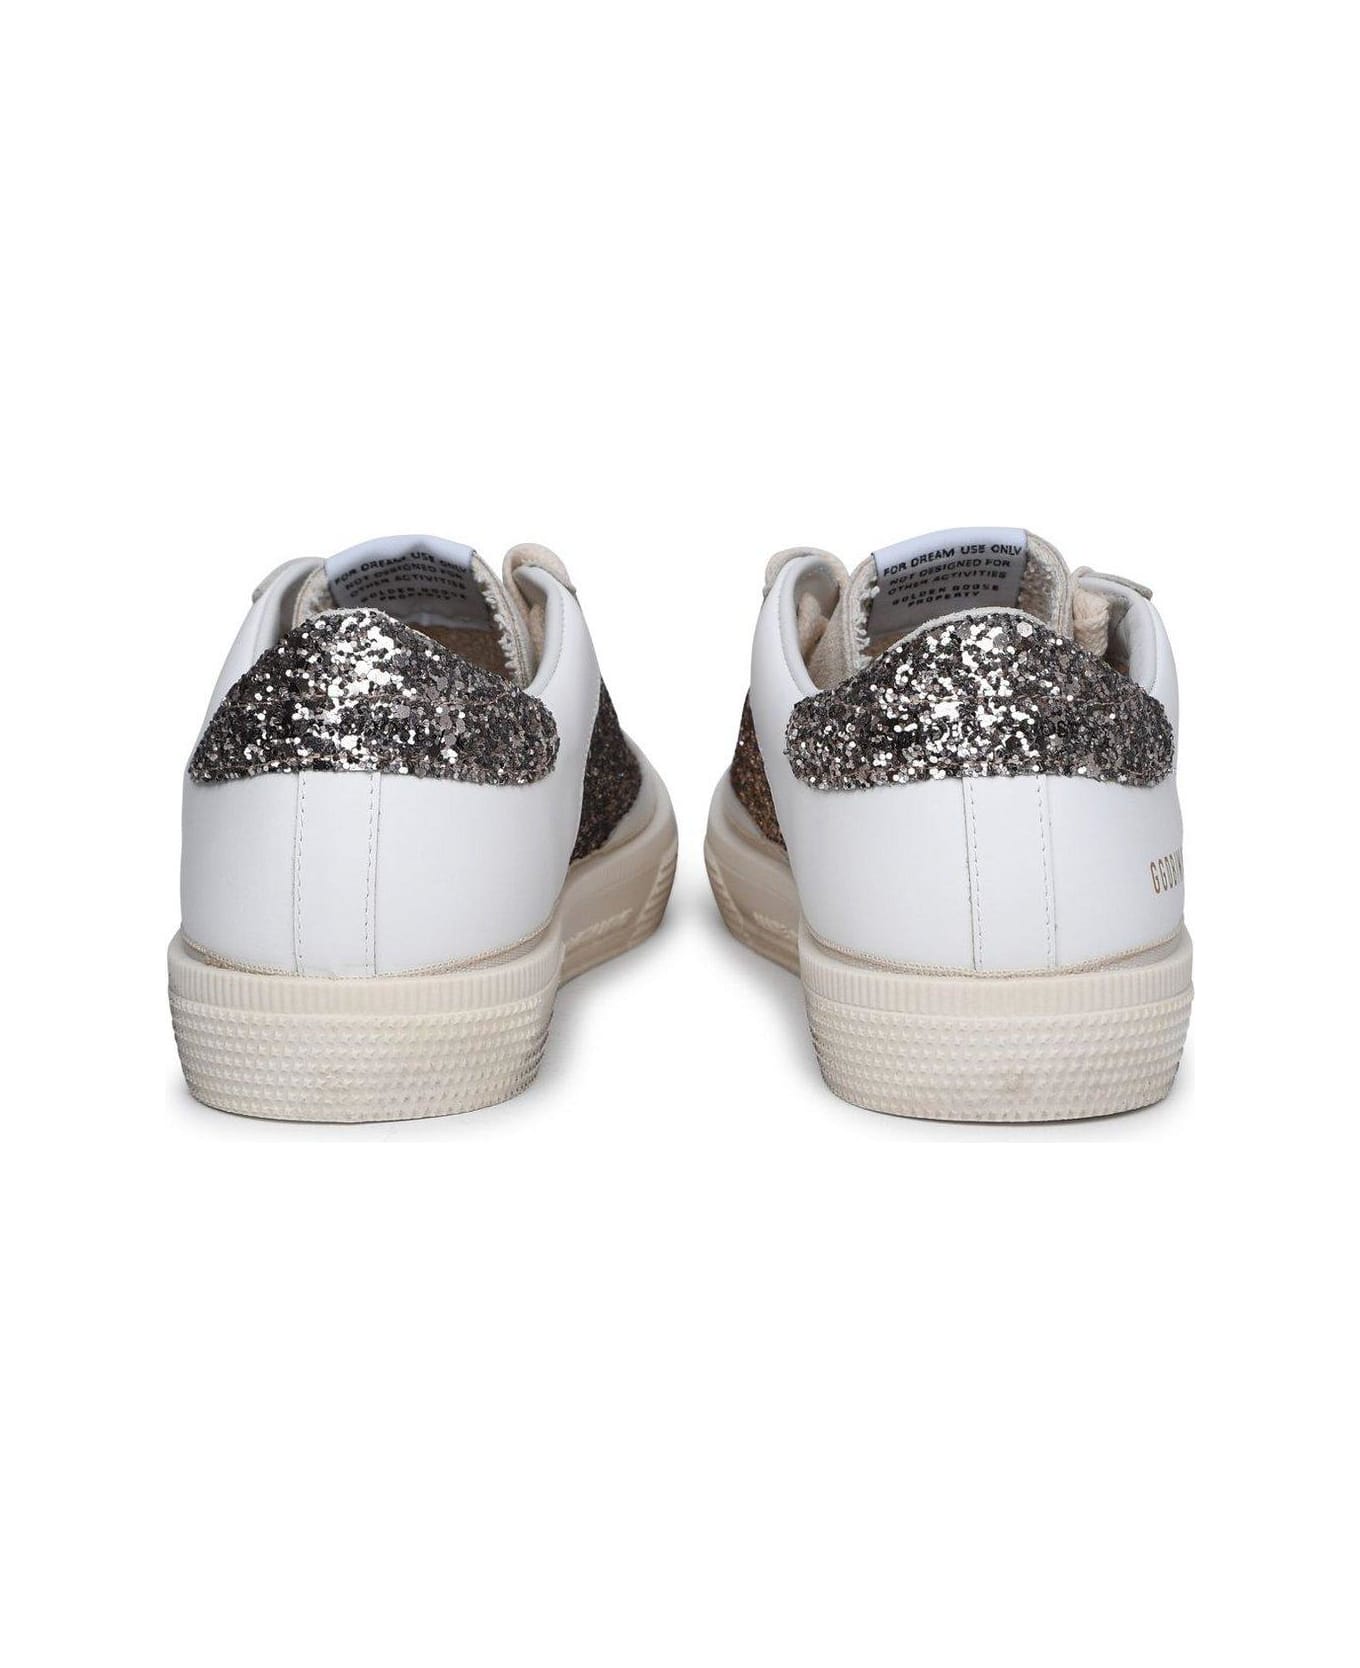 Golden Goose N May Star Glittered Sneakers - White Cinder Seed